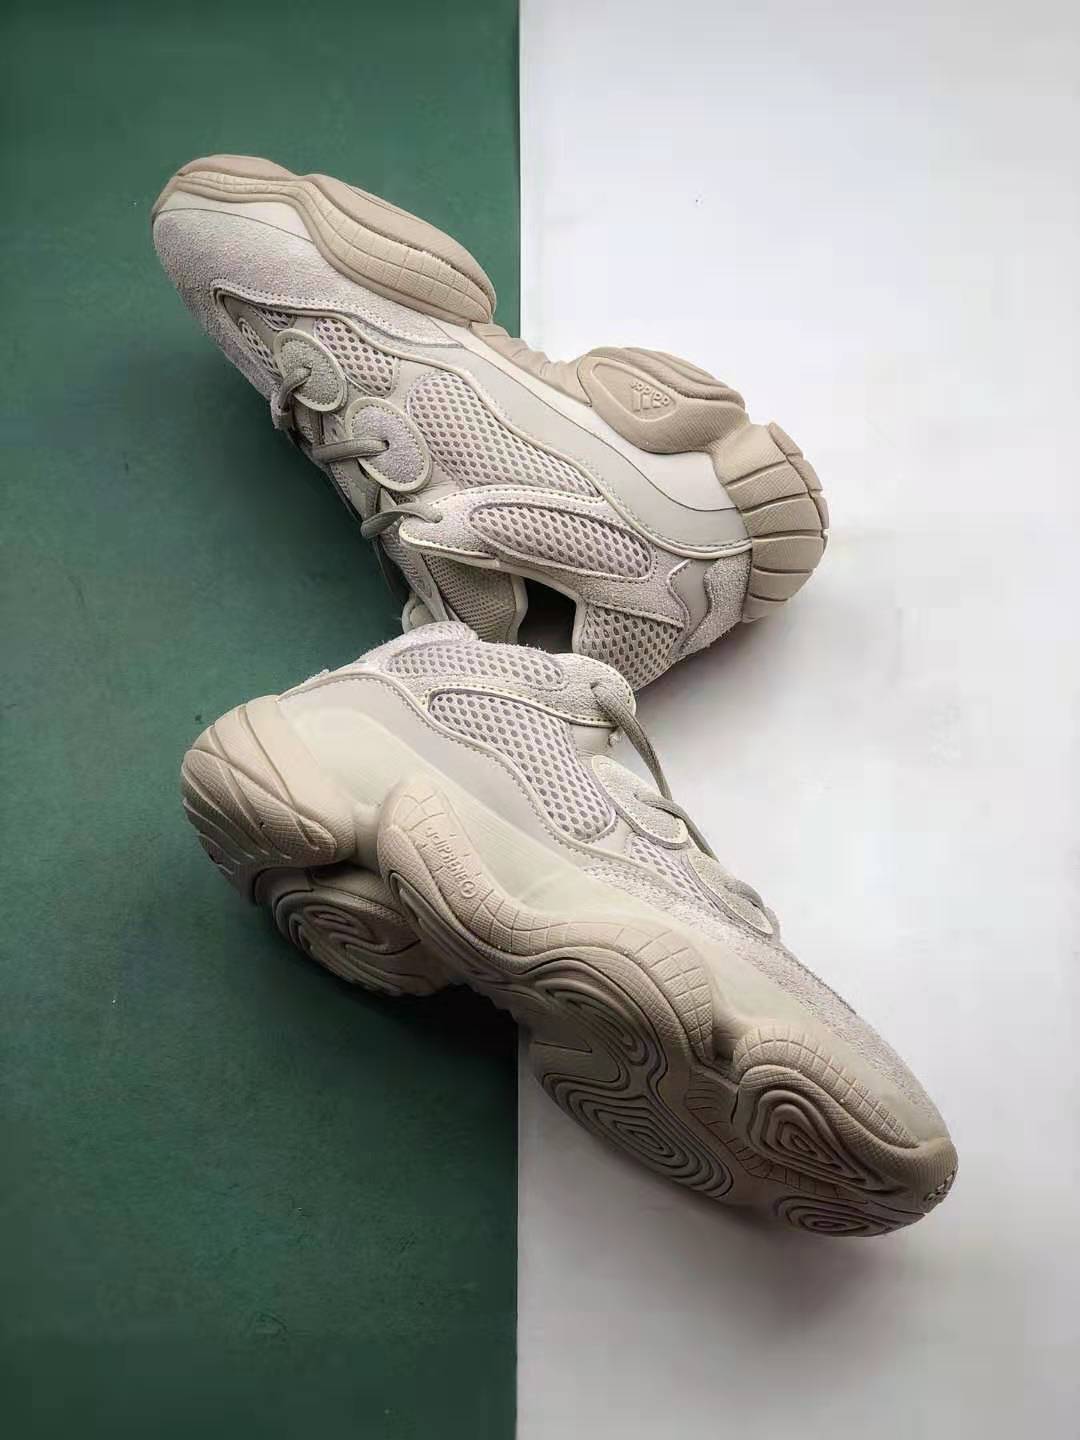 Adidas Yeezy 500 'Blush' DB2908 - Premium Sneakers for Style & Comfort